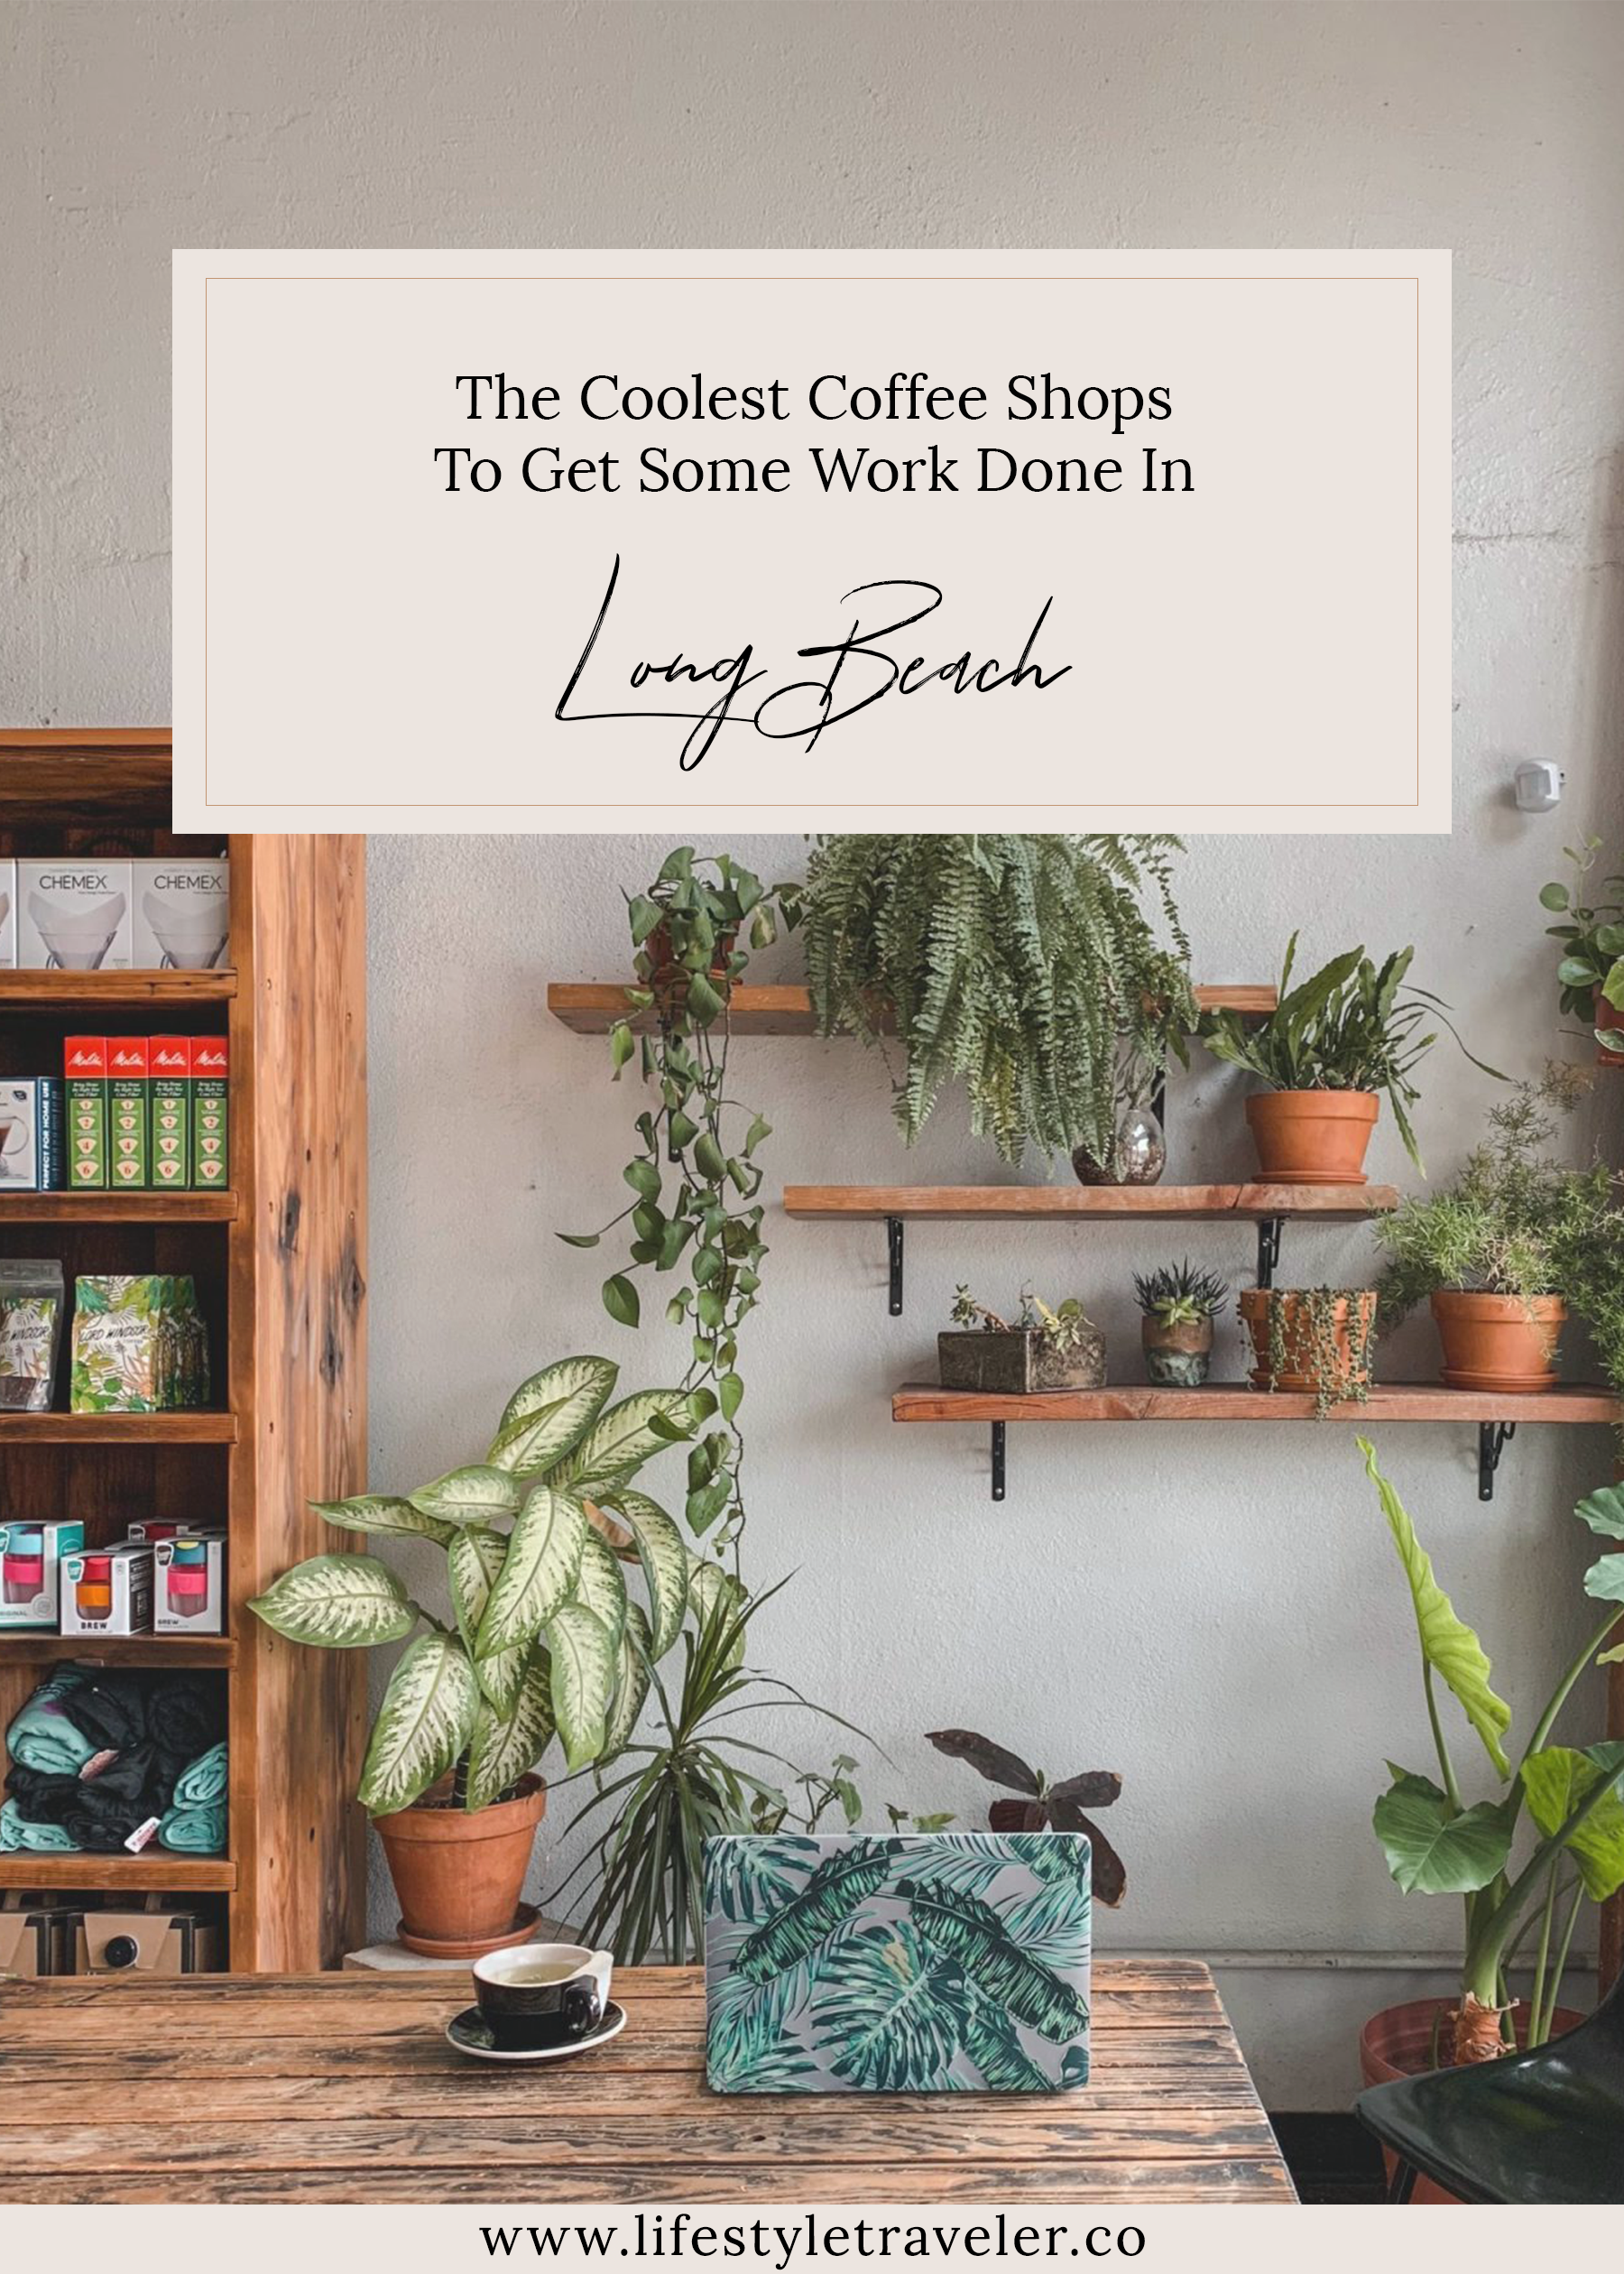 The Coolest Coffee Shops In Long Beach To Get Some Work Done | lifestyletraveler.co | IG: @lifestyletraveler.co